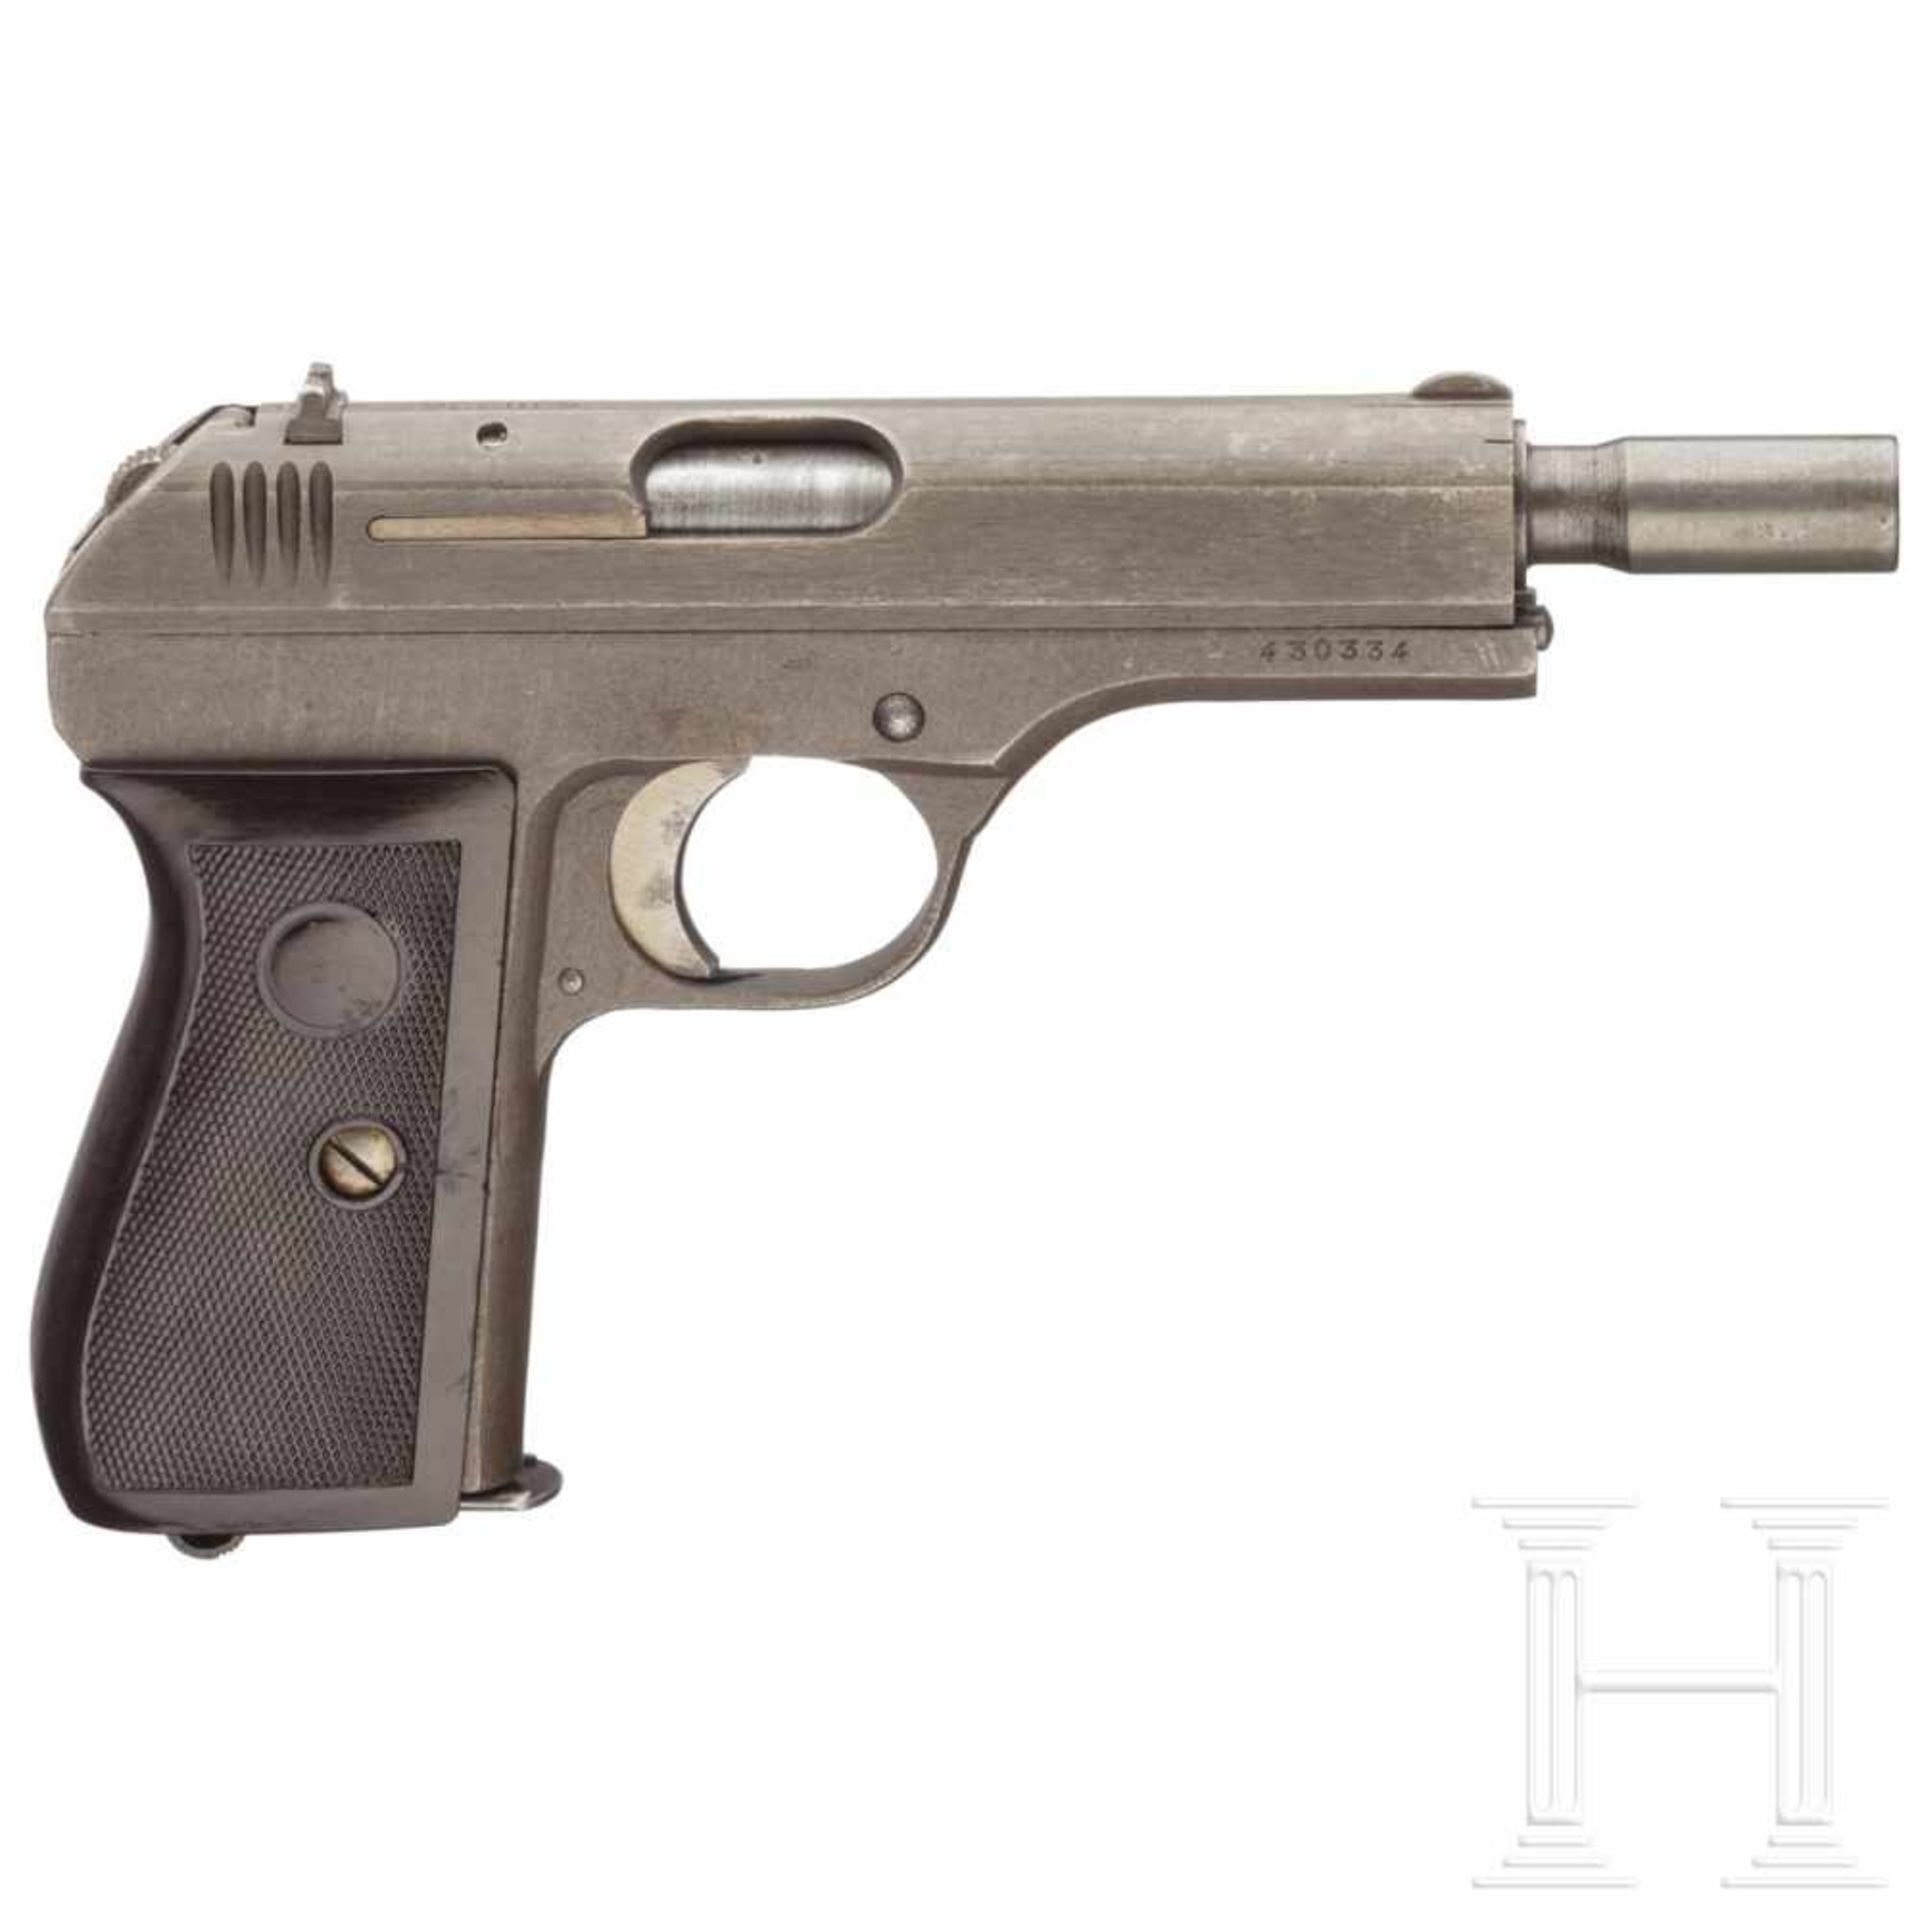 A CZ M 27, code "fnh", barrel with attachment for a silencerKal. 7,65 mm Brown., Nr. 430334, - Bild 2 aus 5